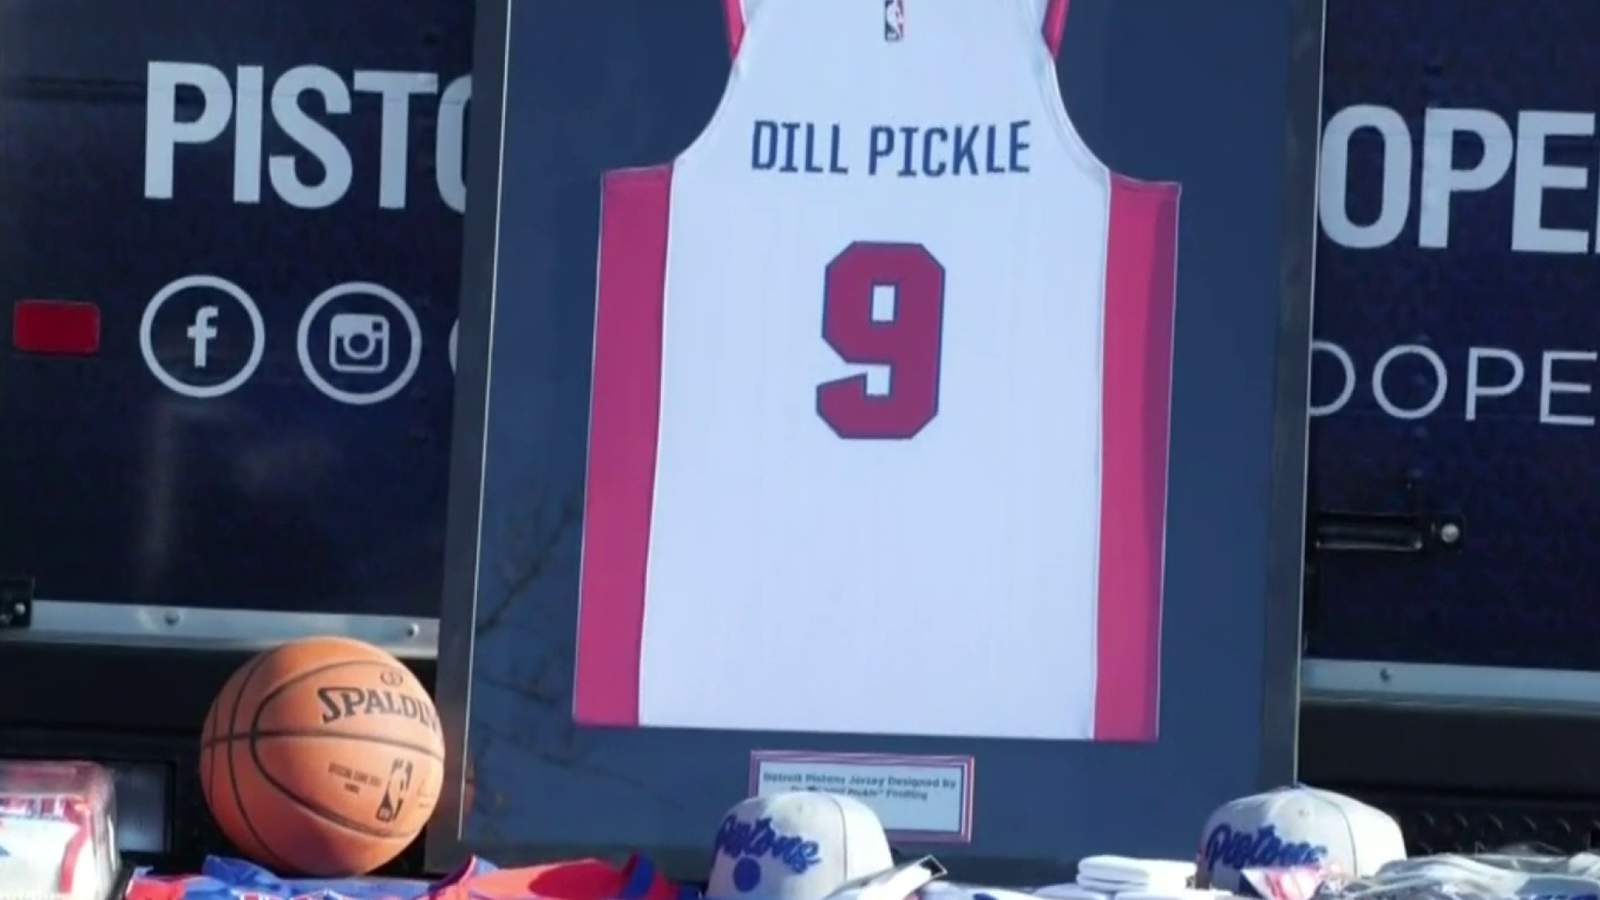 Make A Wish Foundation helps young sports fan design custom Detroit Pistons jersey